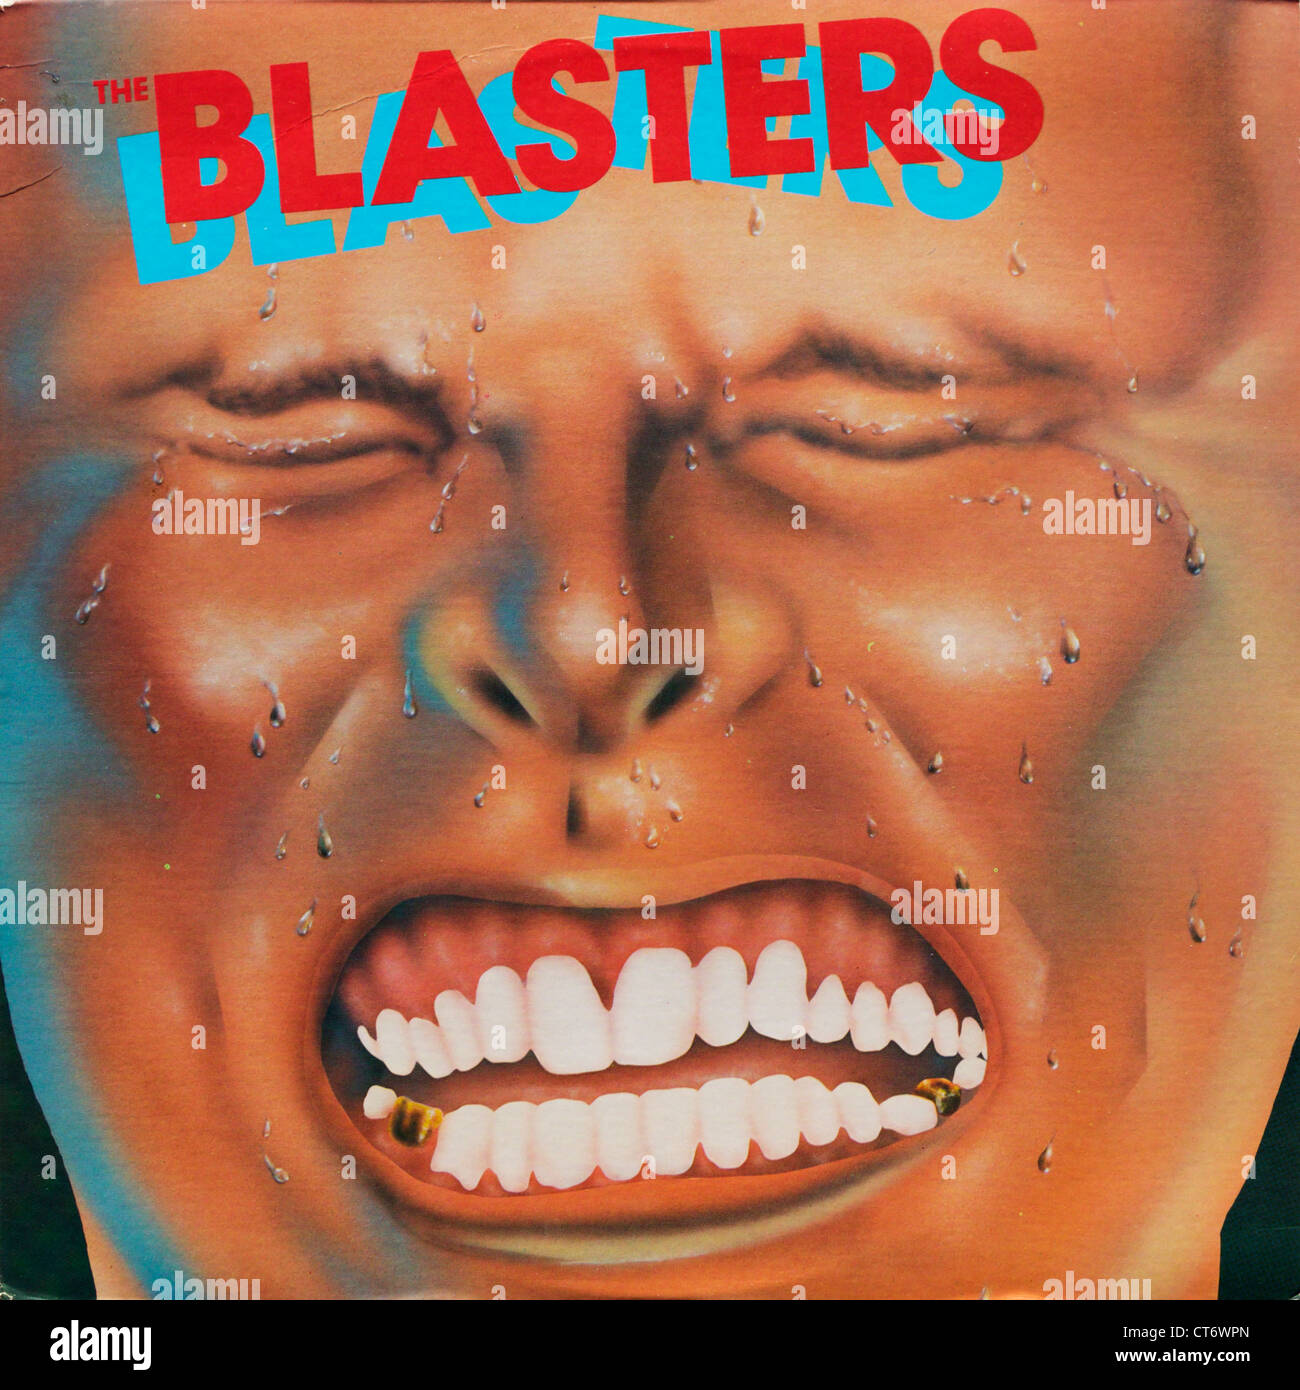 The Blasters record album cover. Editorial use only. Commercial use prohibited. Stock Photo